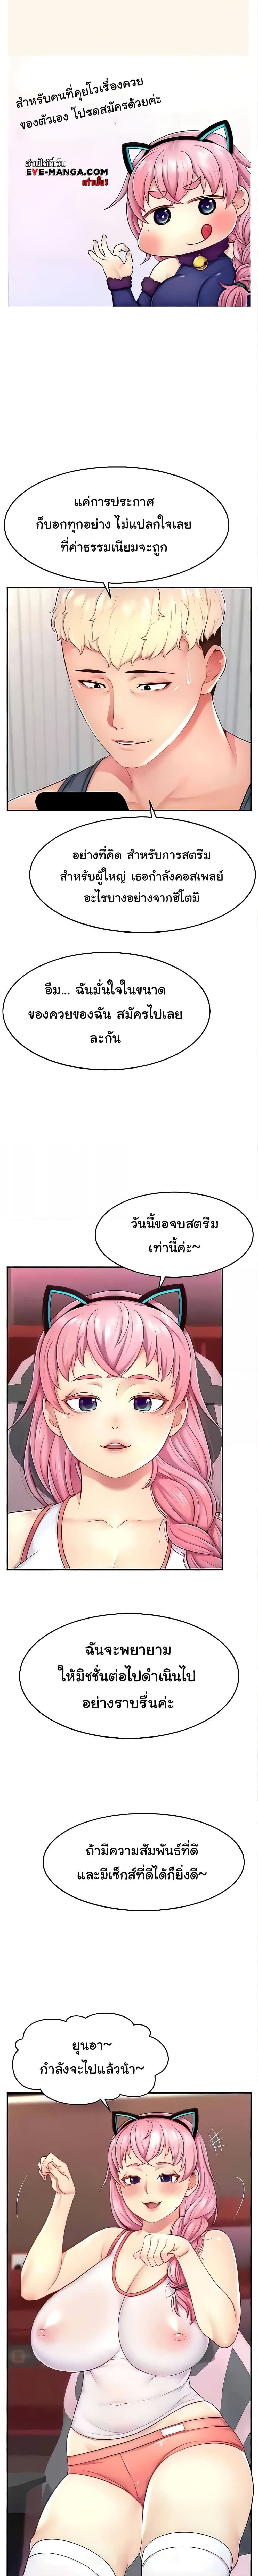 Making Friends With Streamers by Hacking! ตอนที่ 14 ภาพ 6